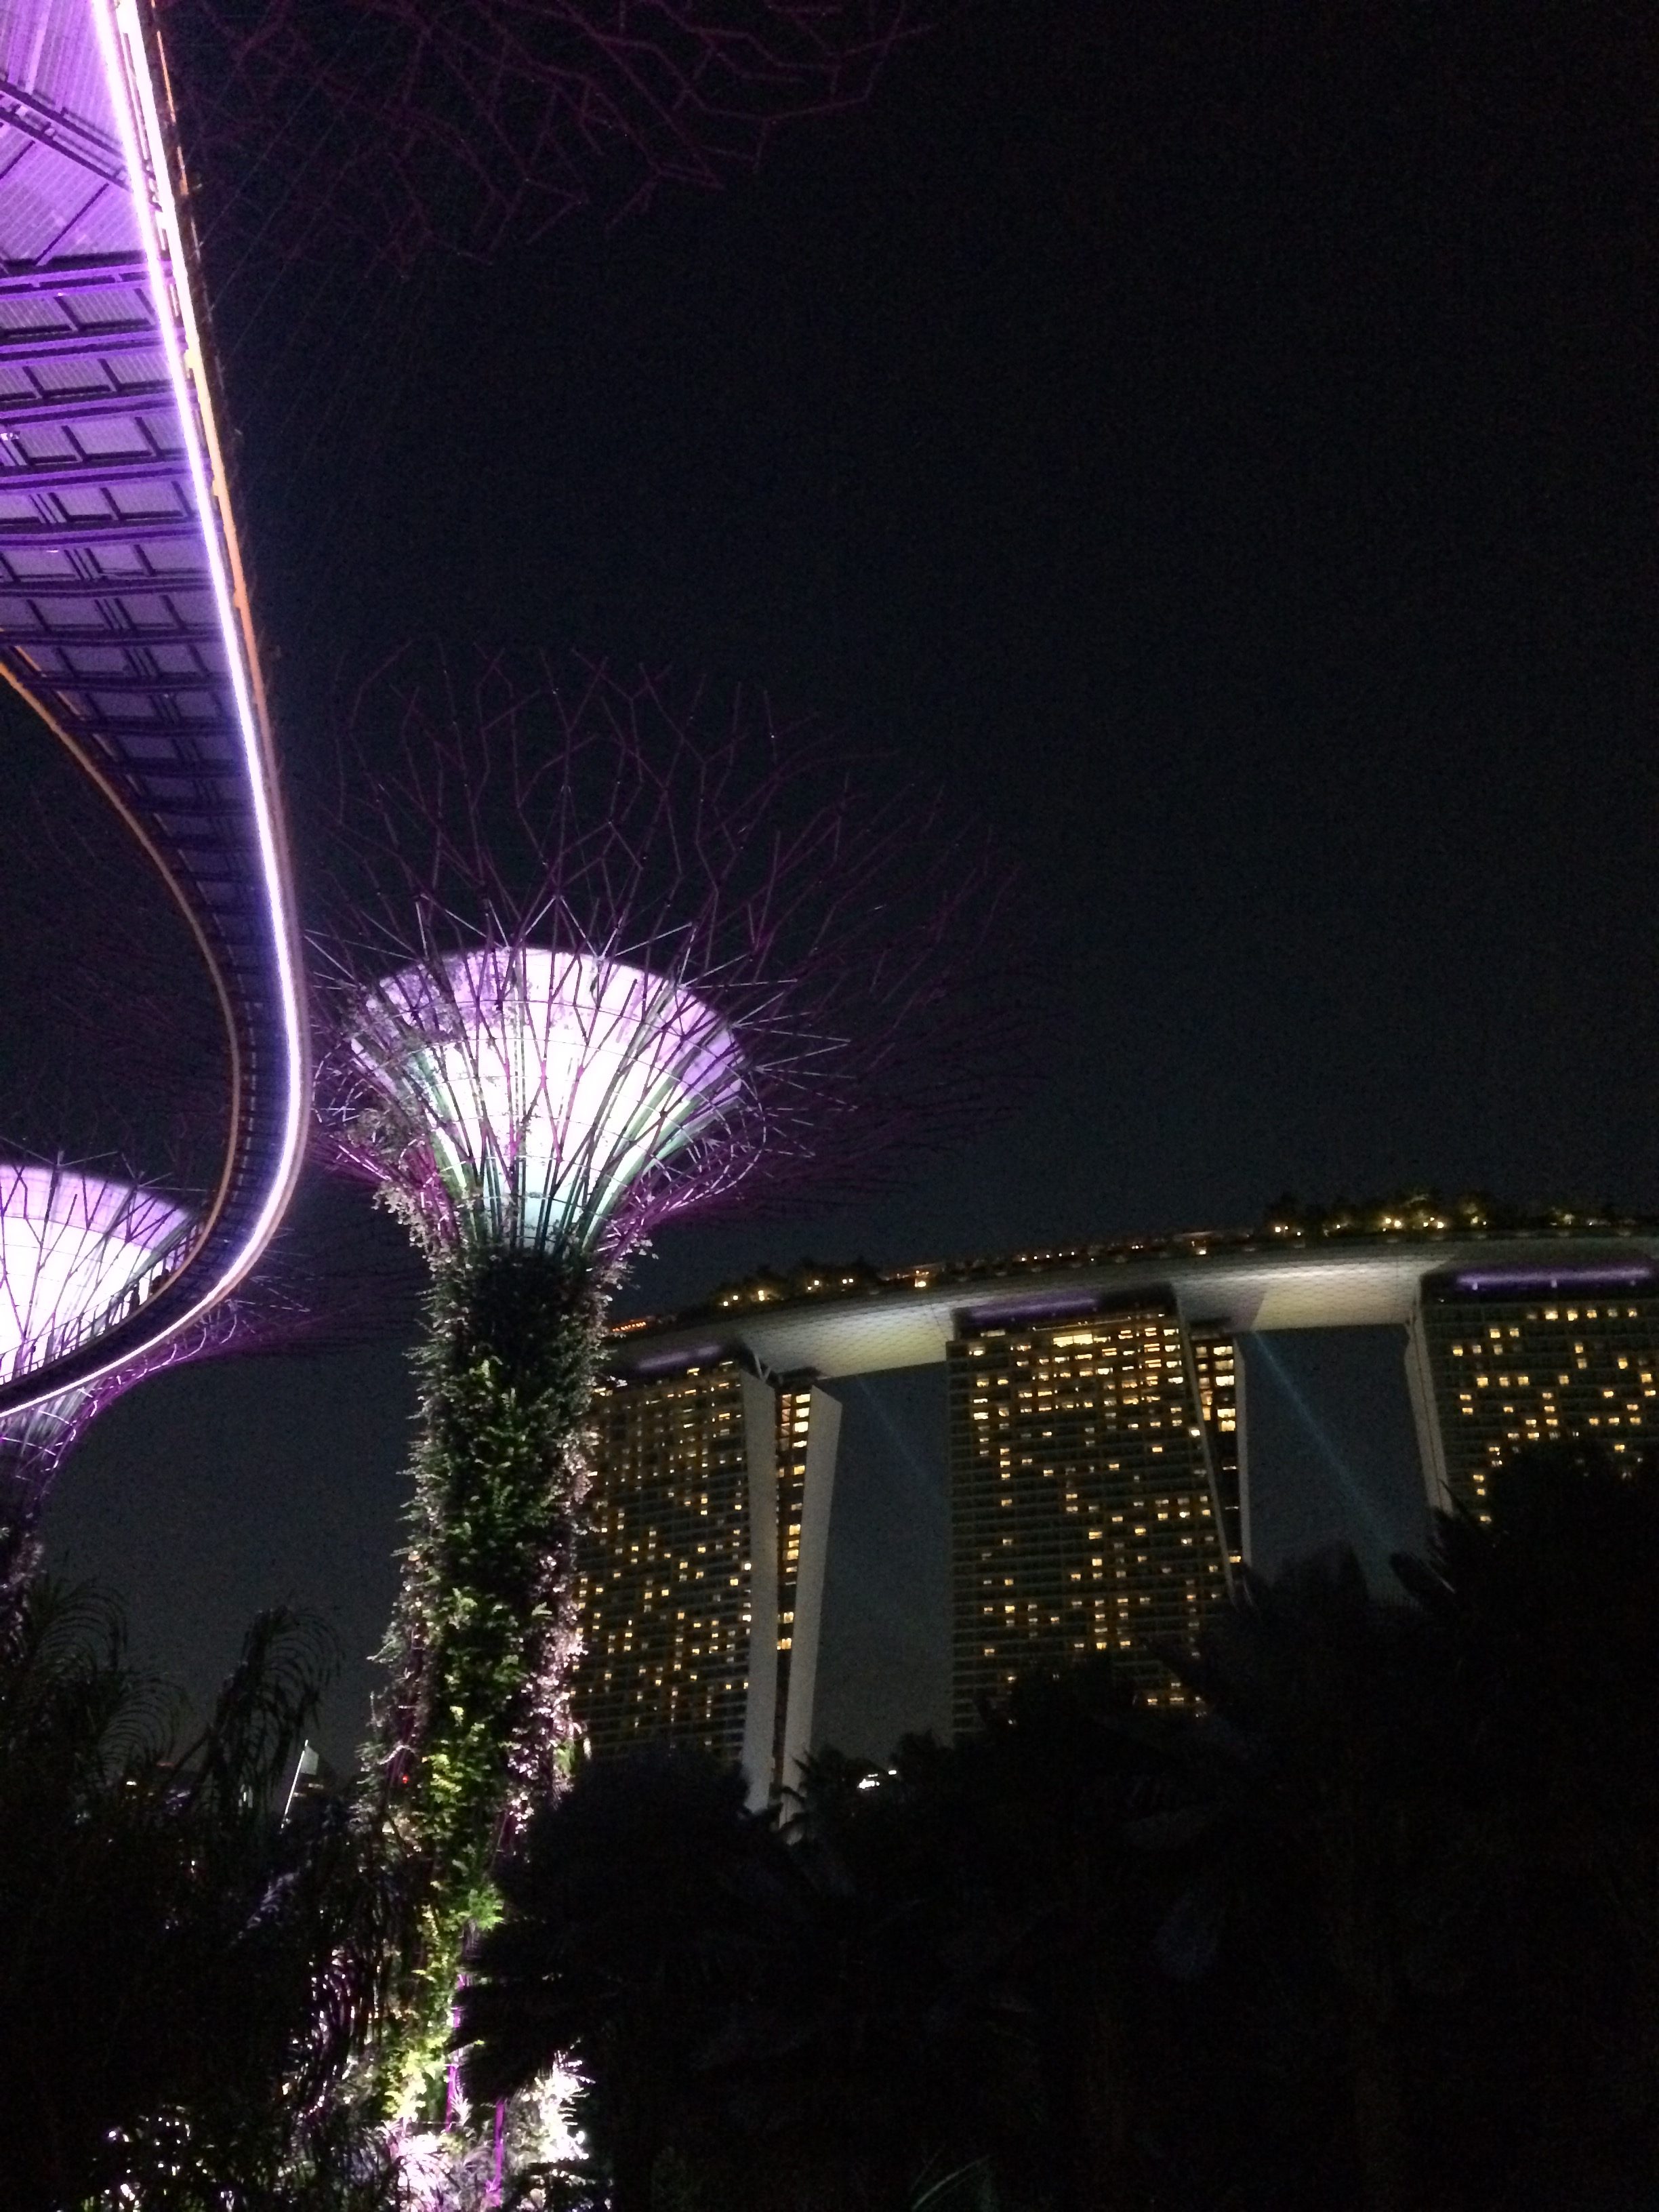 gardens by the bay, Singapore 4 day 3 nights itinerary, things to do in singapore, universal studios singapore, marina bay sands singapore, amazon singapore